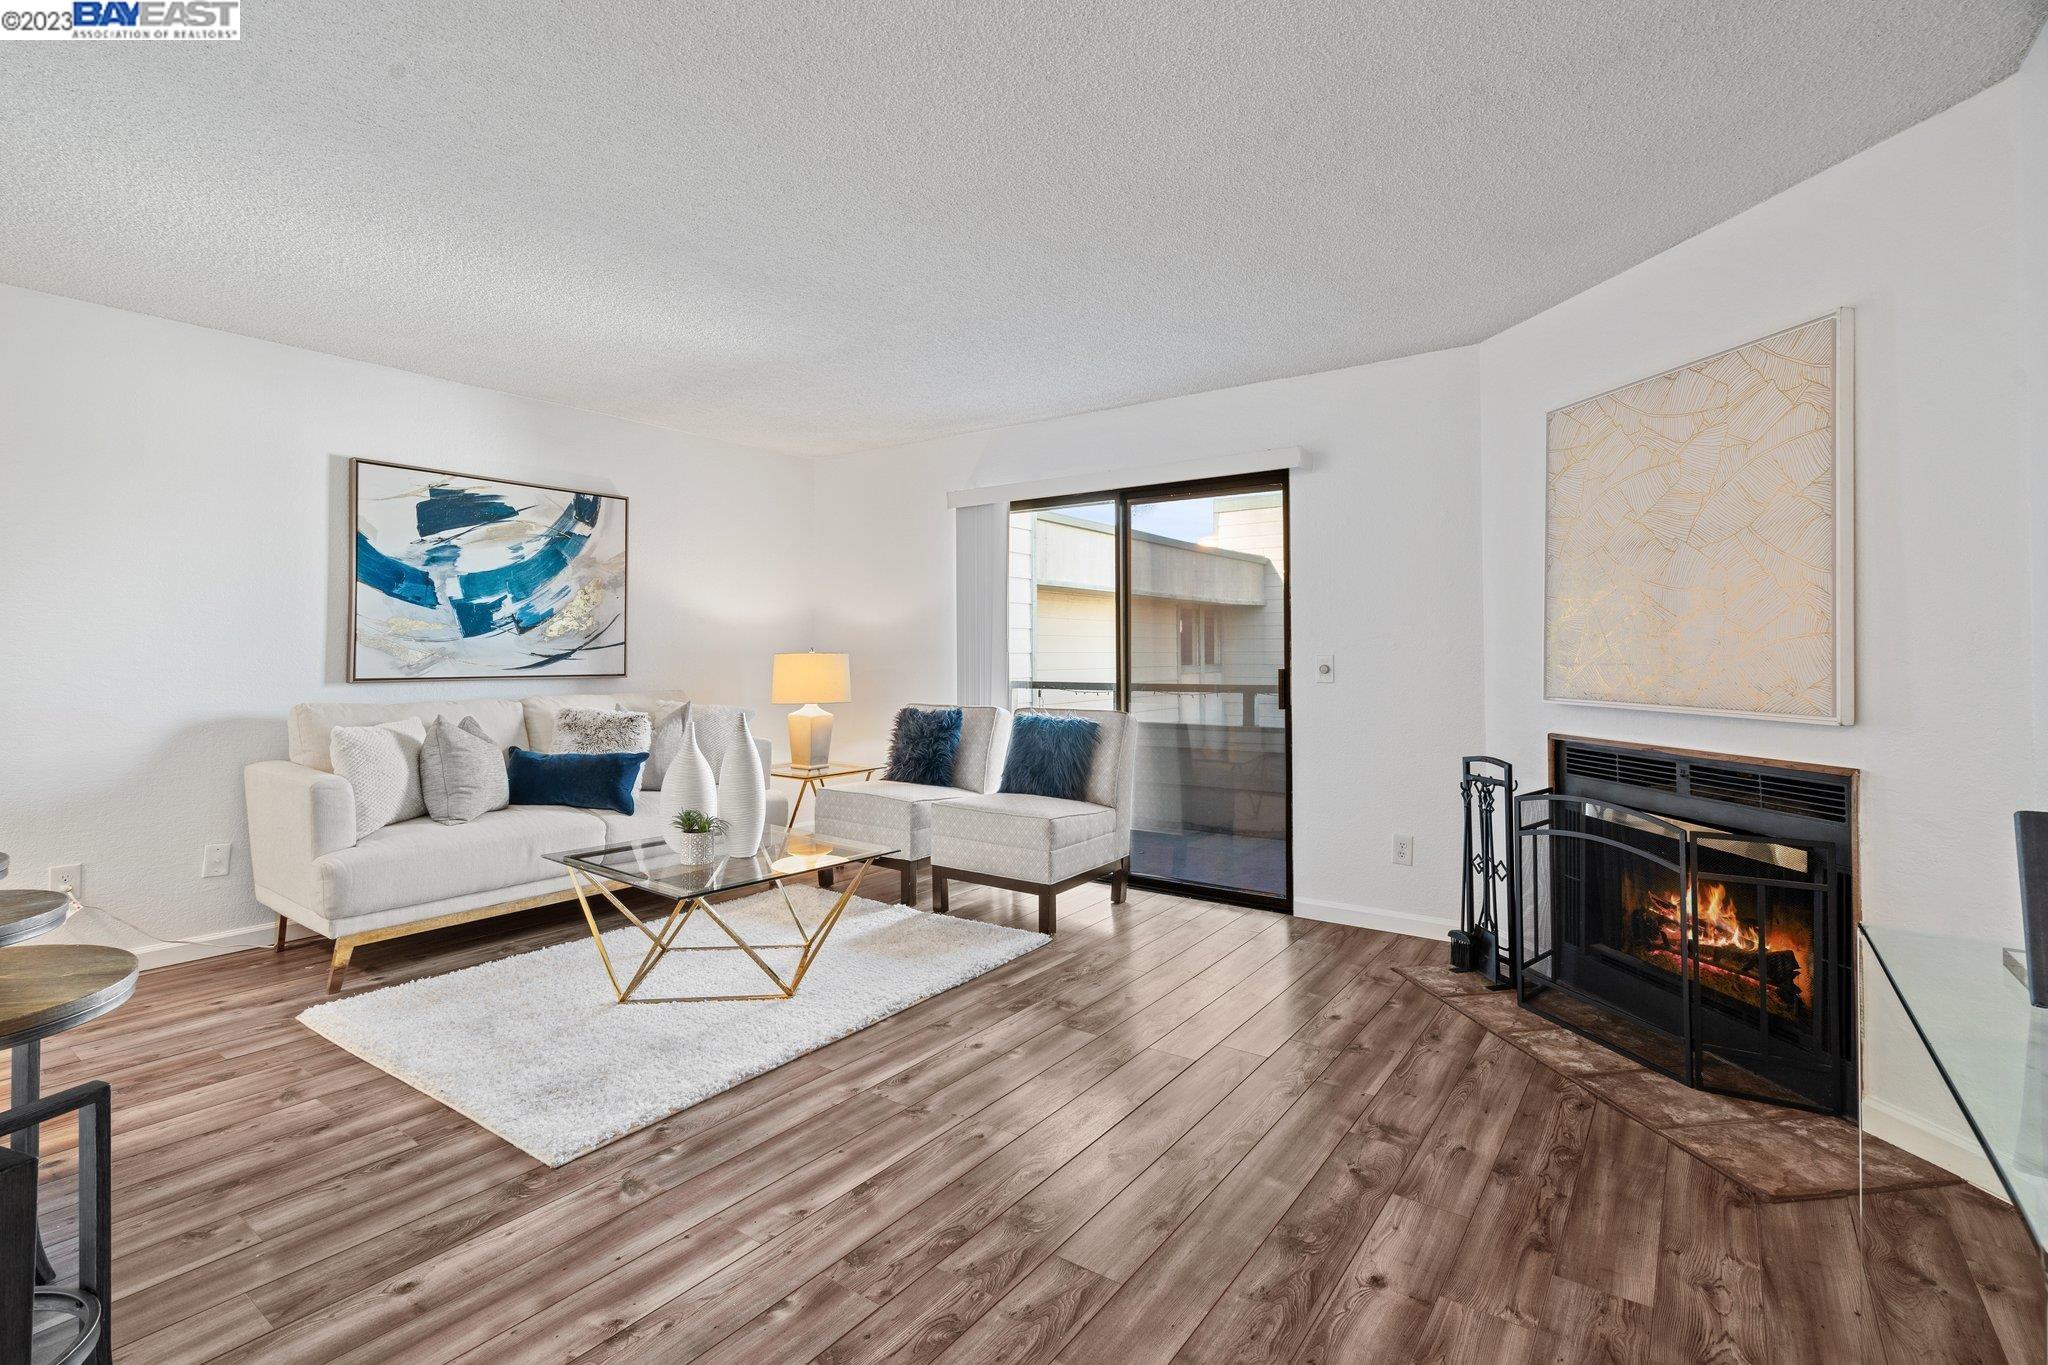 More Details about MLS # 41036602 : 2077 WASHINGTON AVE # 314